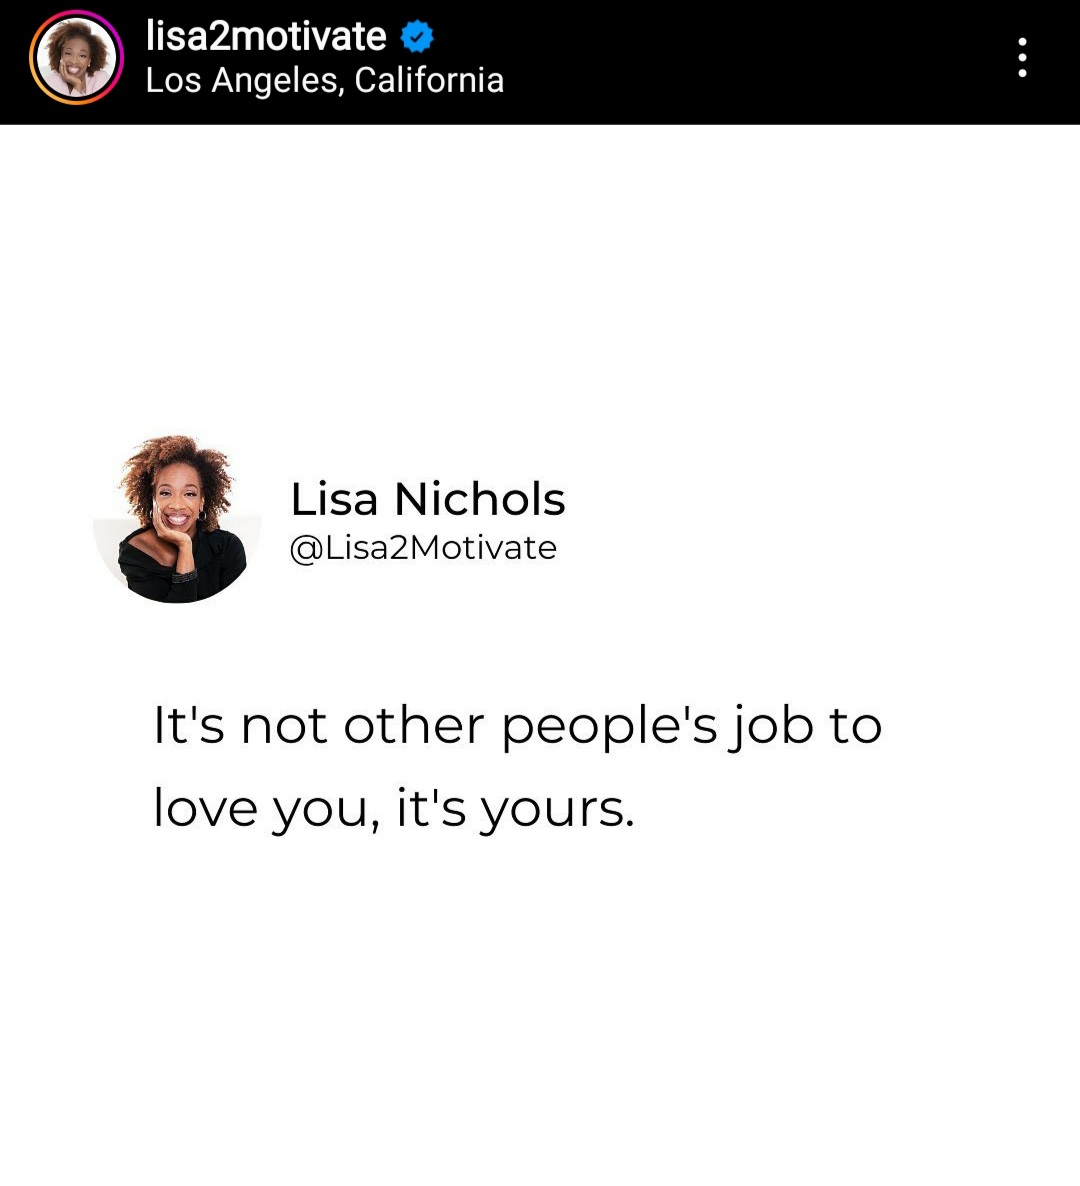 It's not other people's job to love you, it's yours. Lisa Nichols, coaching tip